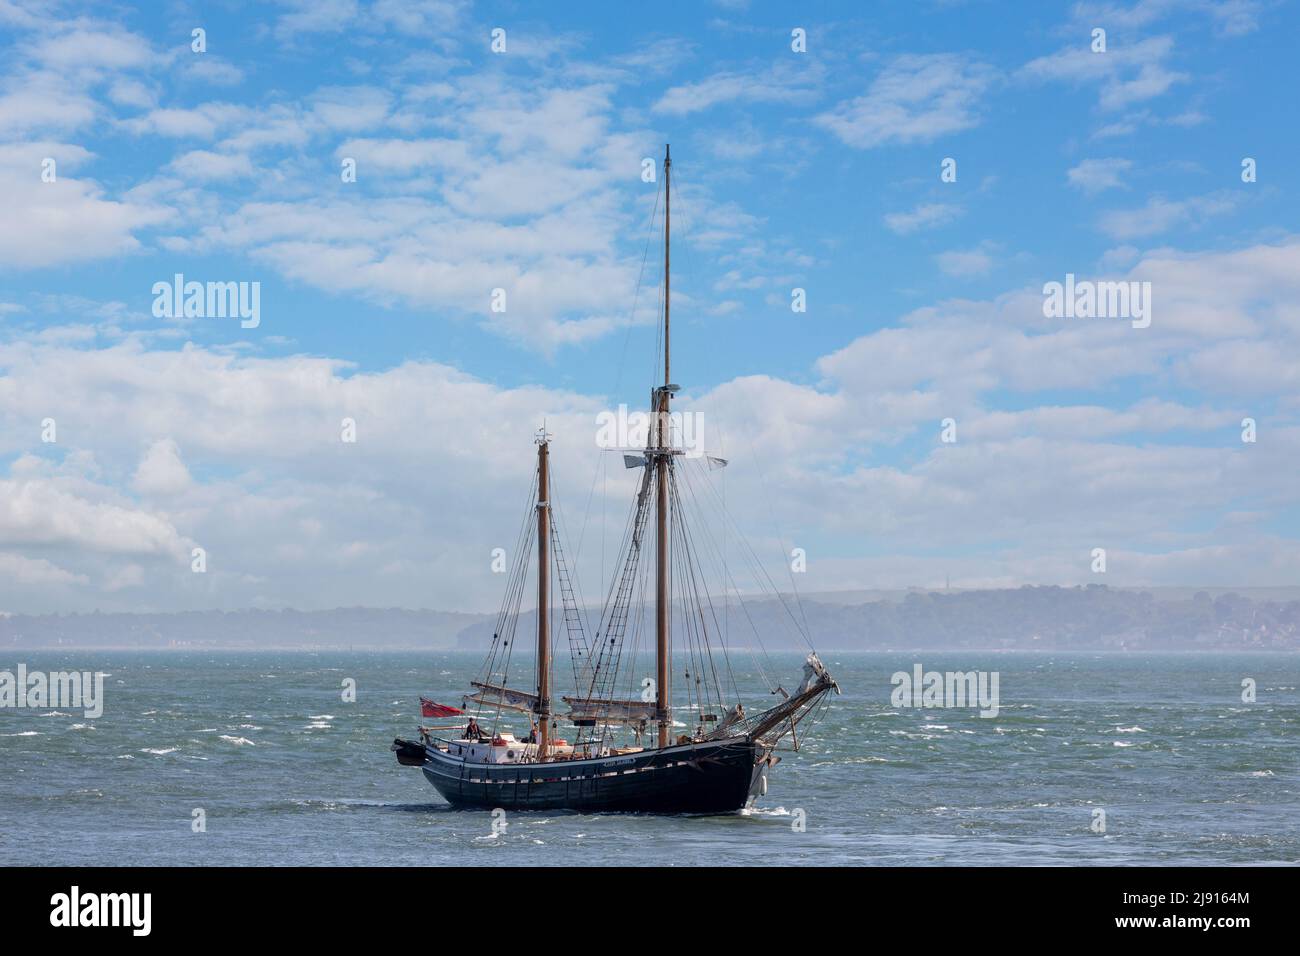 Sail training ship Queen Galadriel crossing the Solent Stock Photo